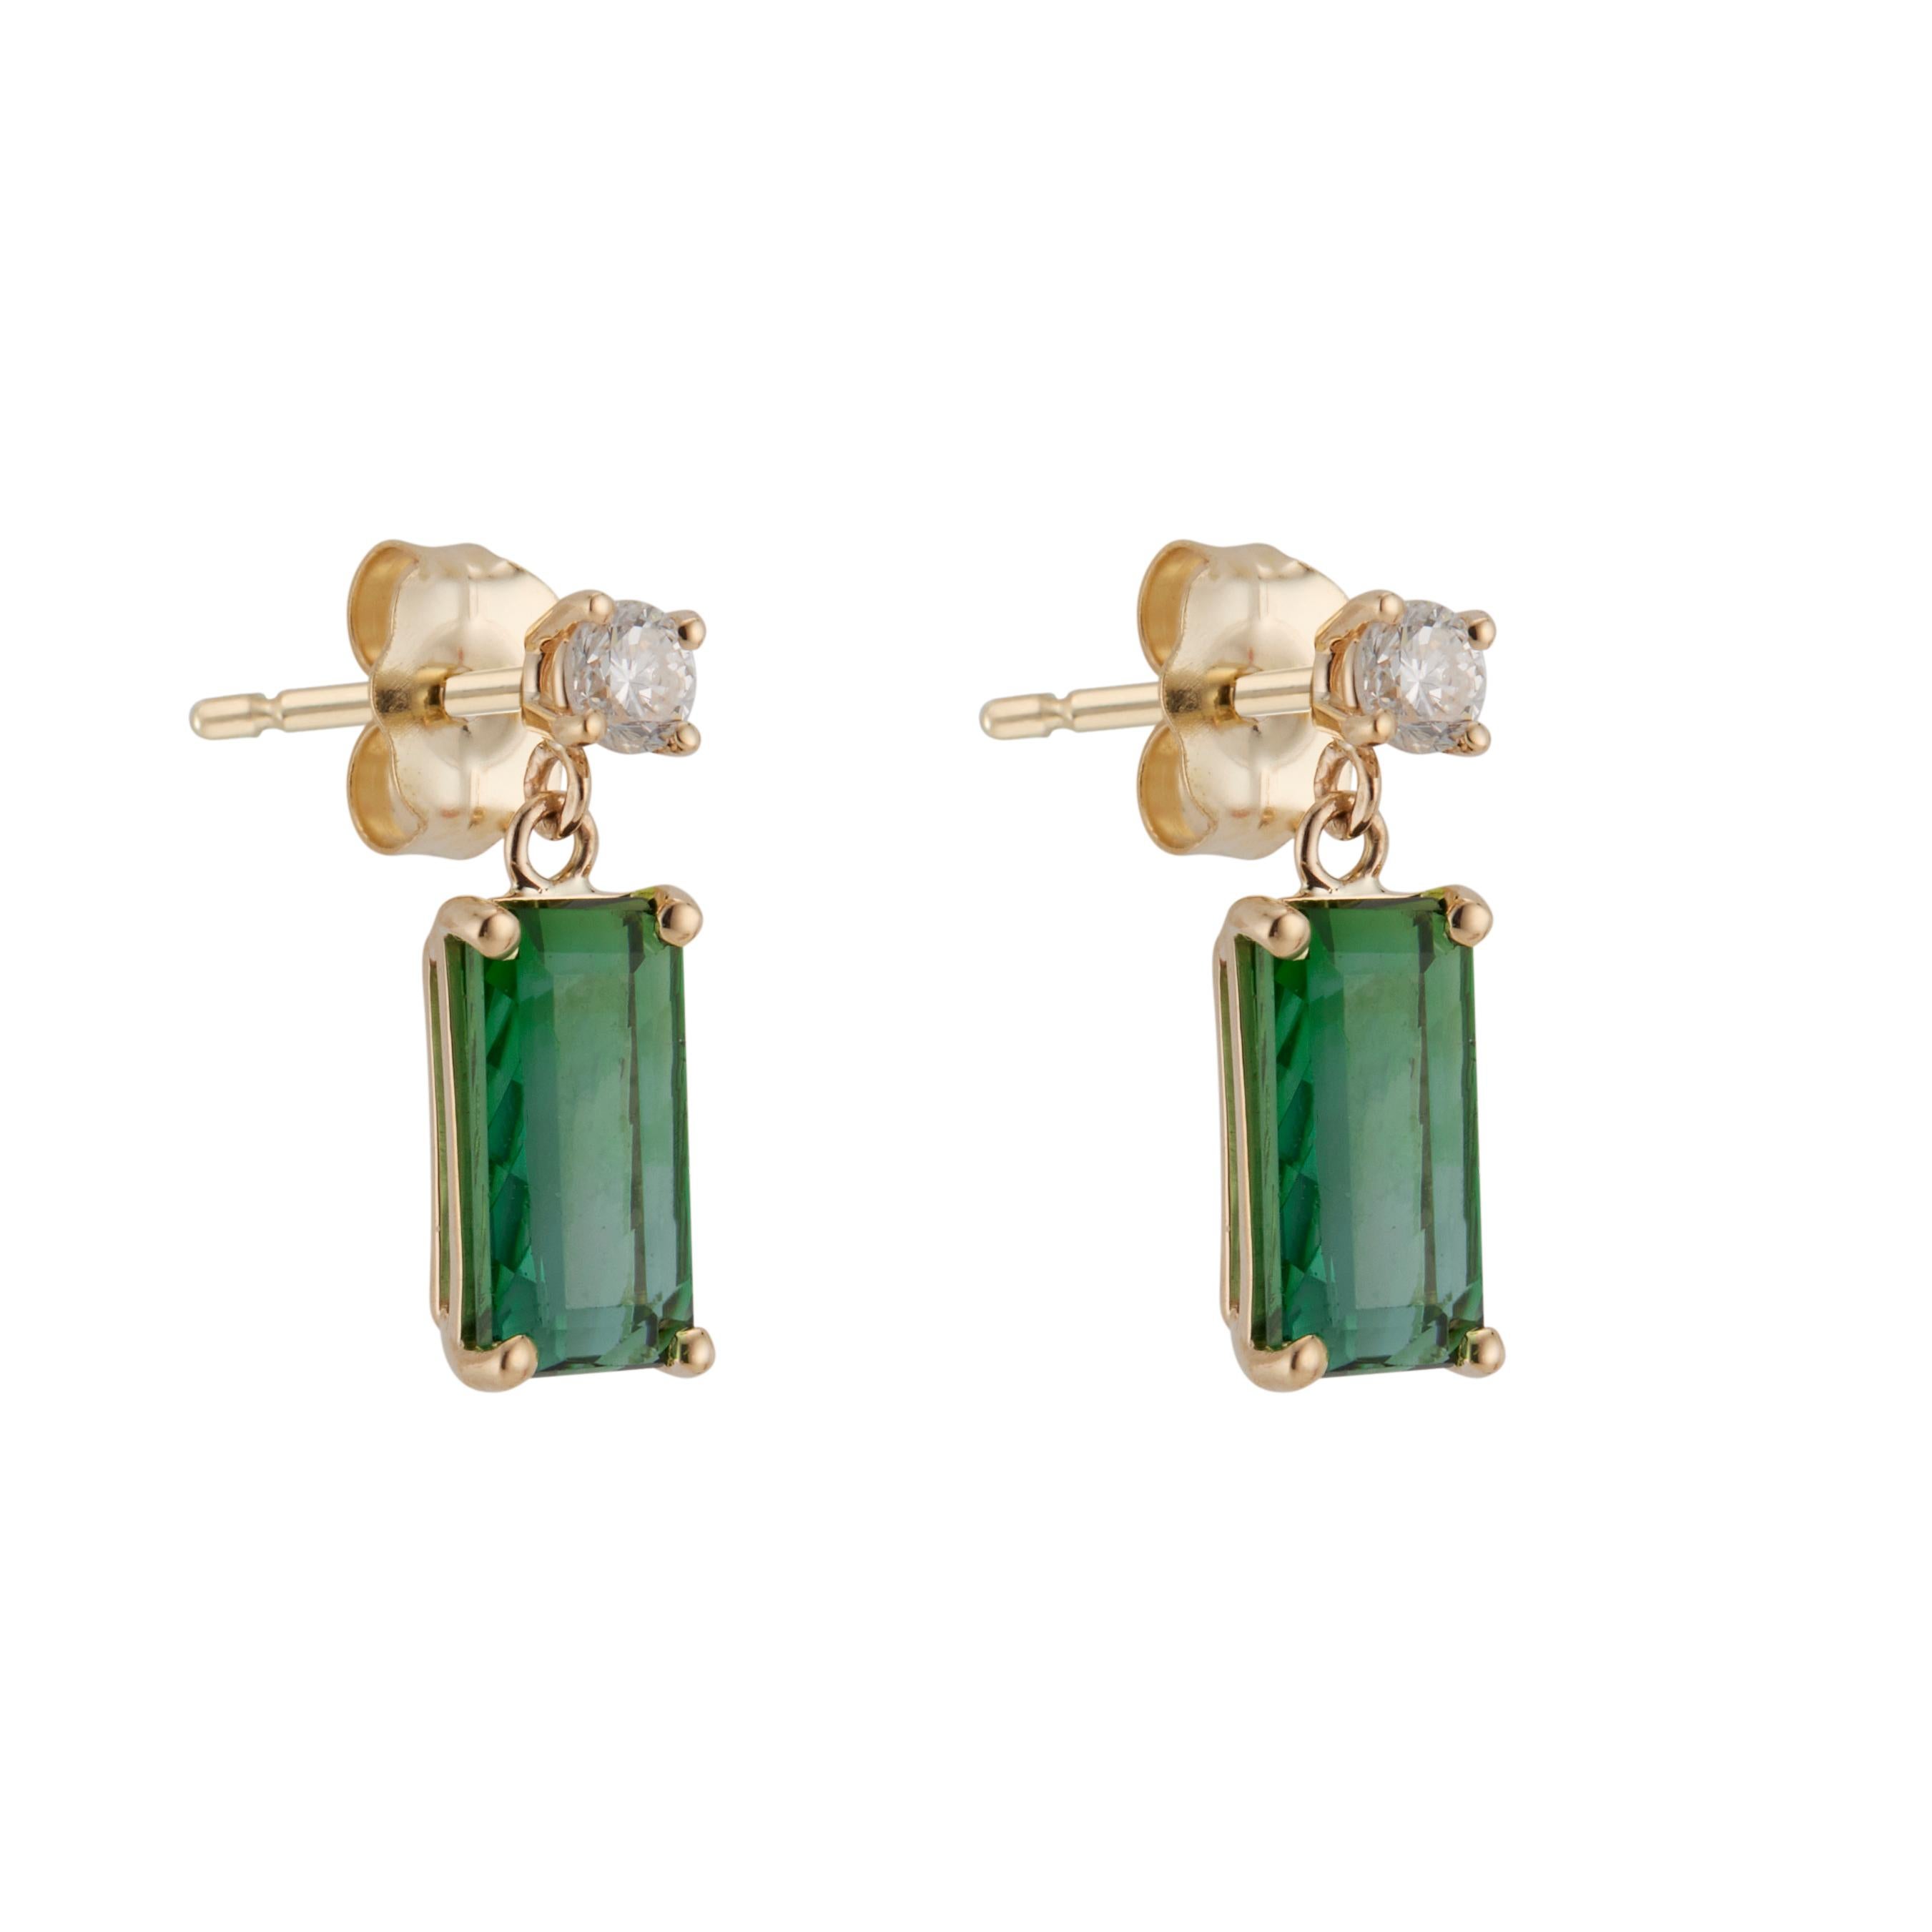 Tourmaline and diamond dangle earrings. Custom cut rectangular green tourmalines dangles, with 2 round brilliant cut top diamonds set in 14k yellow bold baskets from the Peter Suchy workshop.

2 rectangular green quilt cut bottom tourmalines, VS